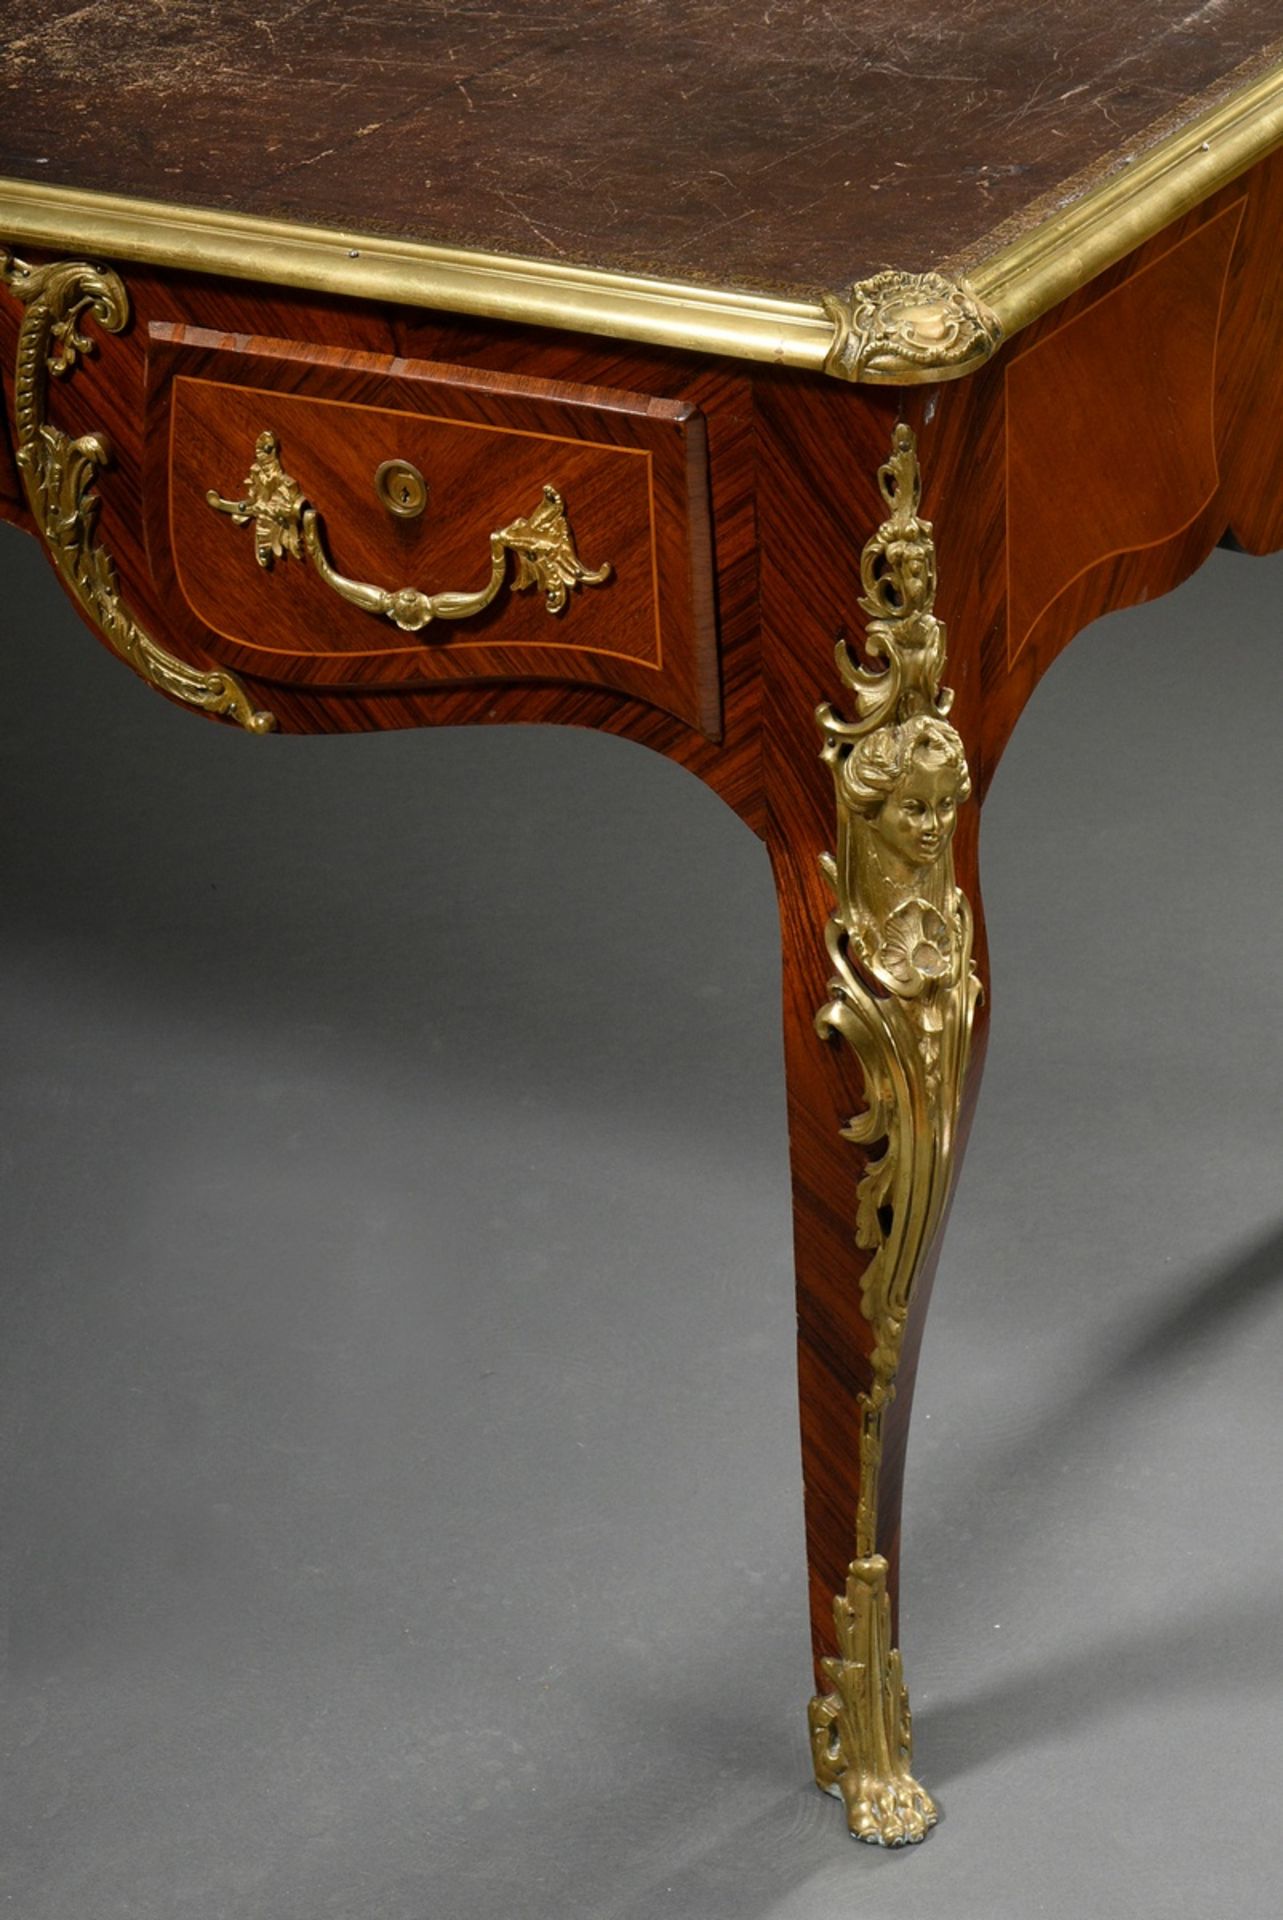 French bureau plat in Louis XV style on high curved legs with rich bronze fittings "busts of women" - Image 2 of 10